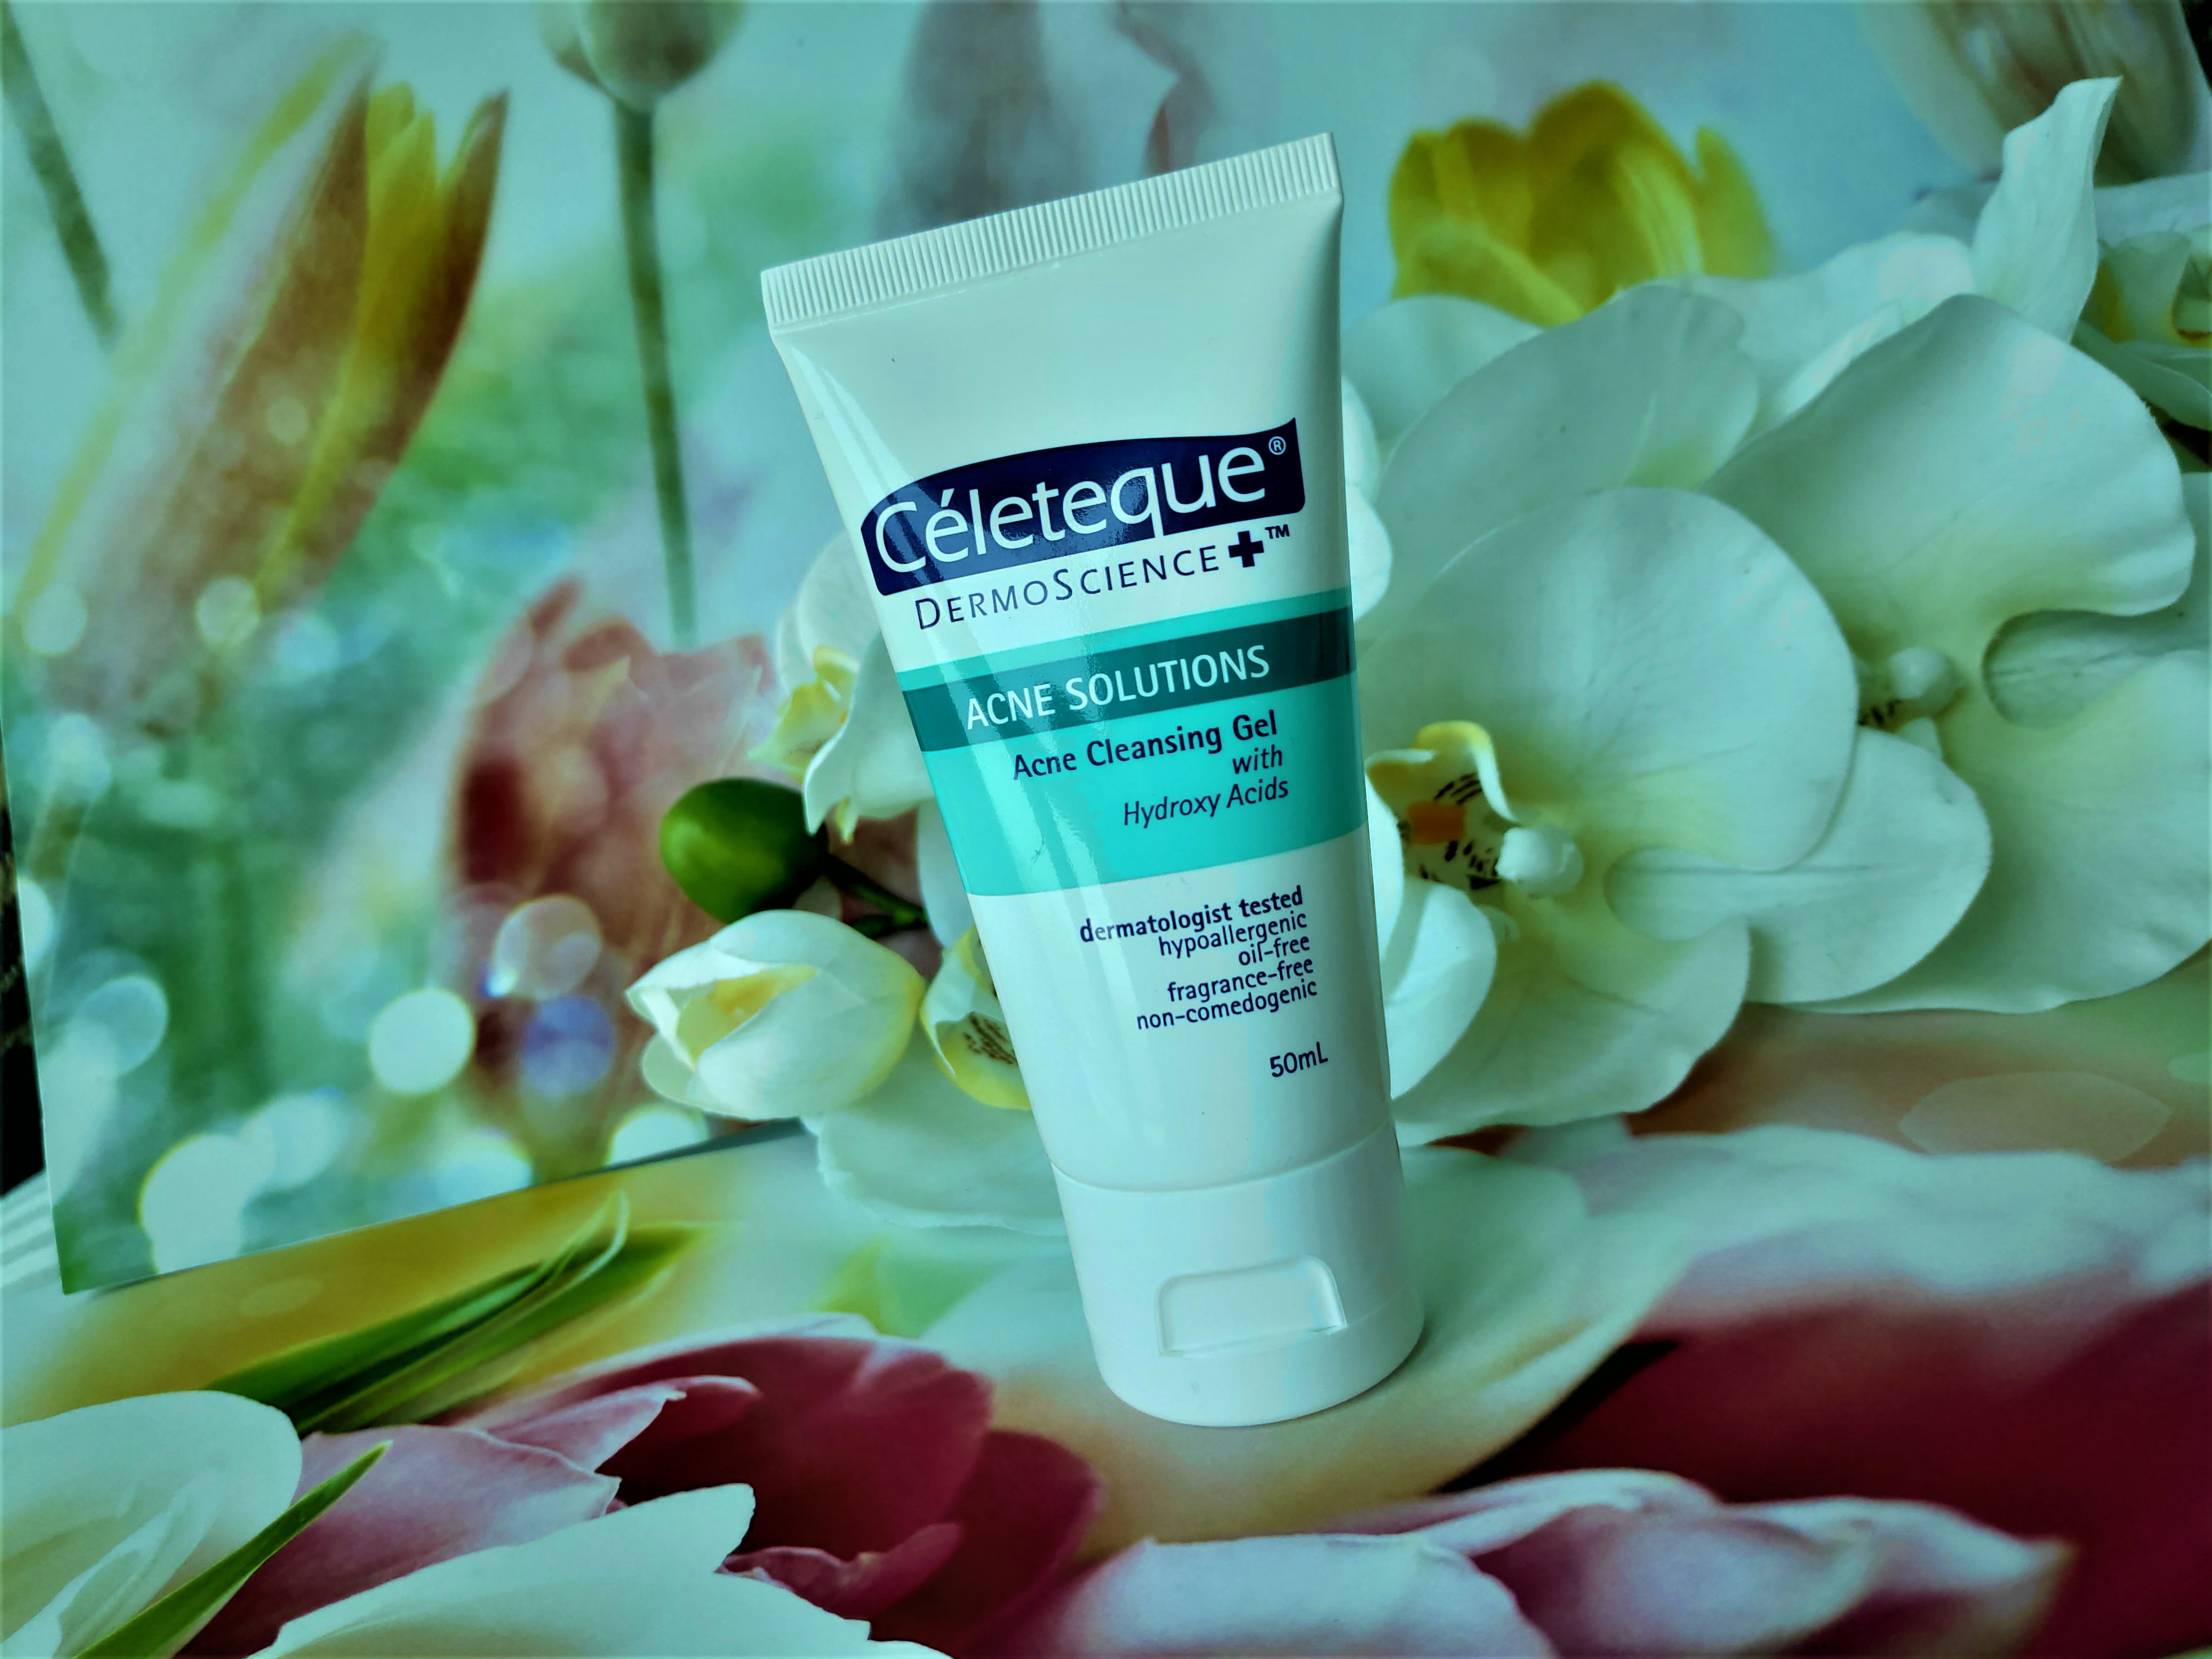 Celeteque Acne Solutions acne clearing gel